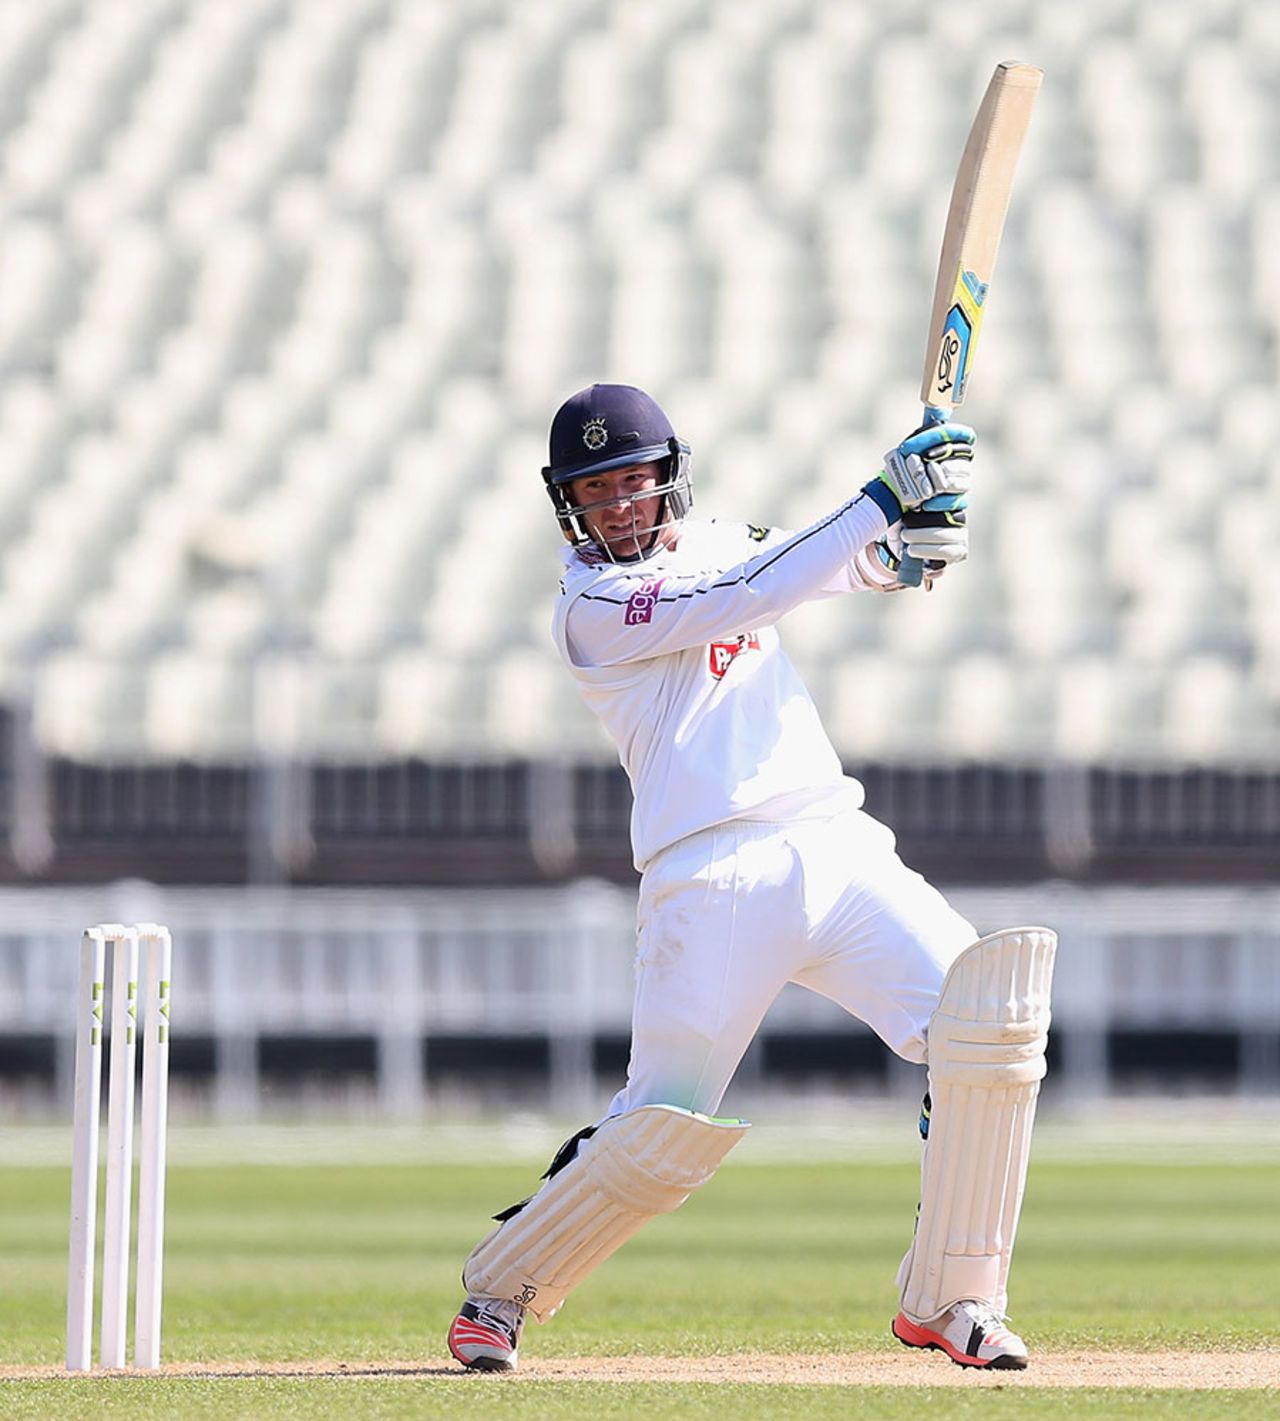 Liam Dawson made a start but couldn't go on, Warwickshire v Hampshire, County Championship Division One, Edgbaston, 3rd day, April 21, 2015